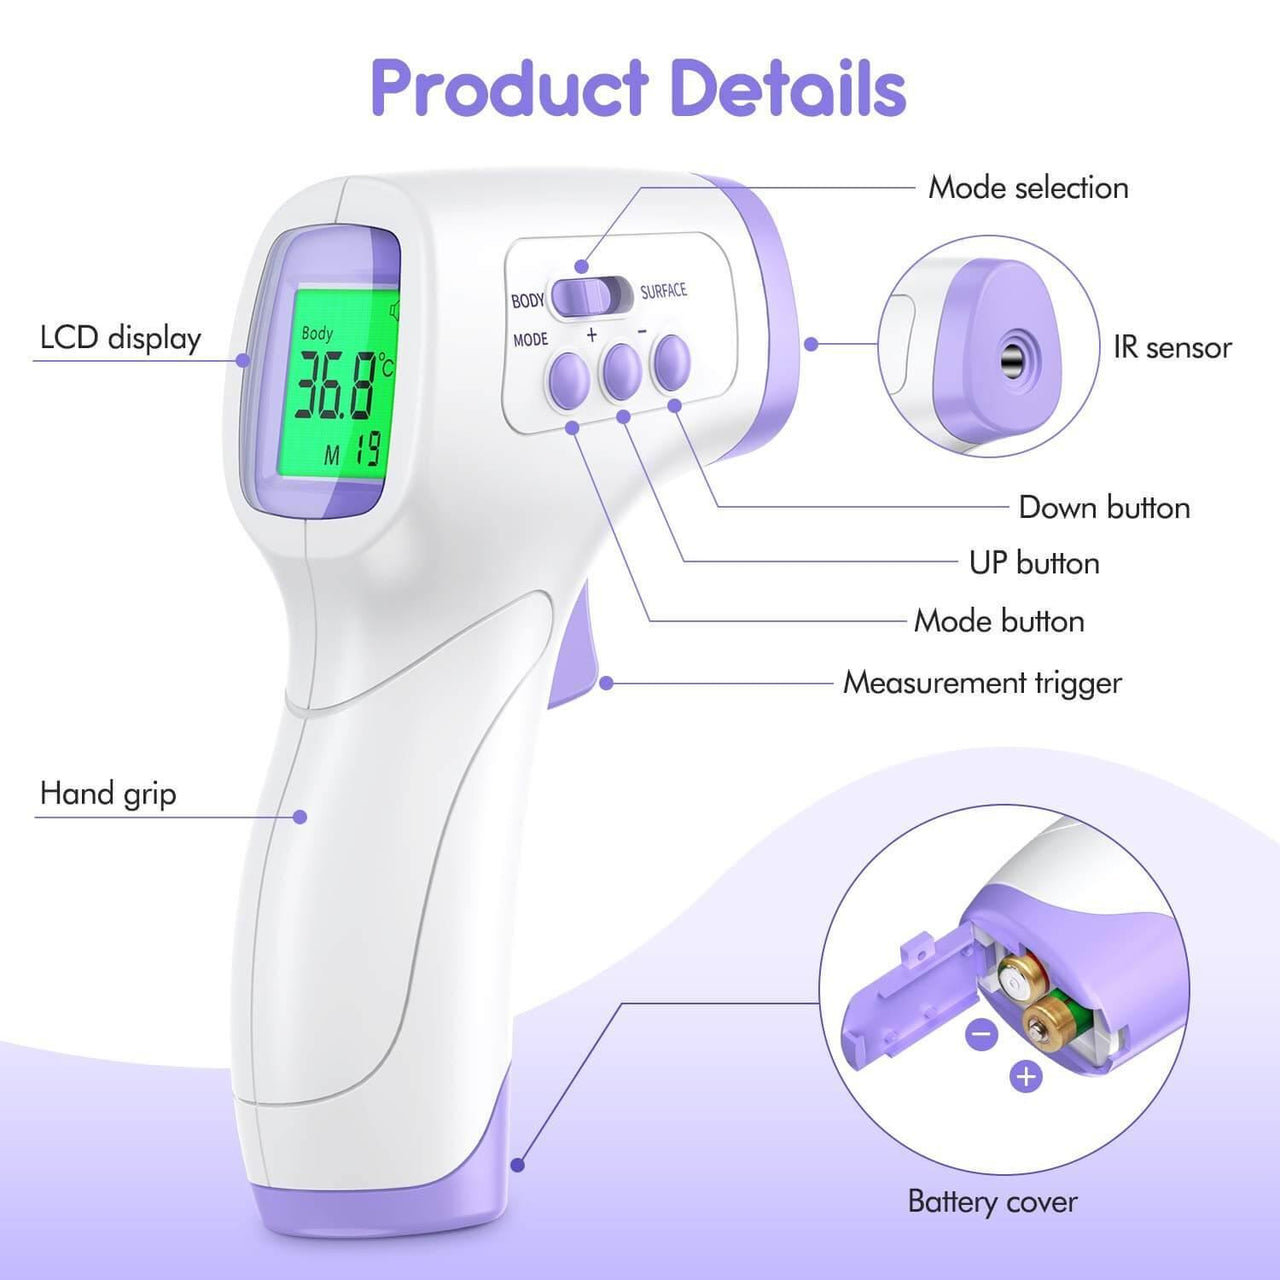 Baby Infrared Forehead or Surface Thermometer